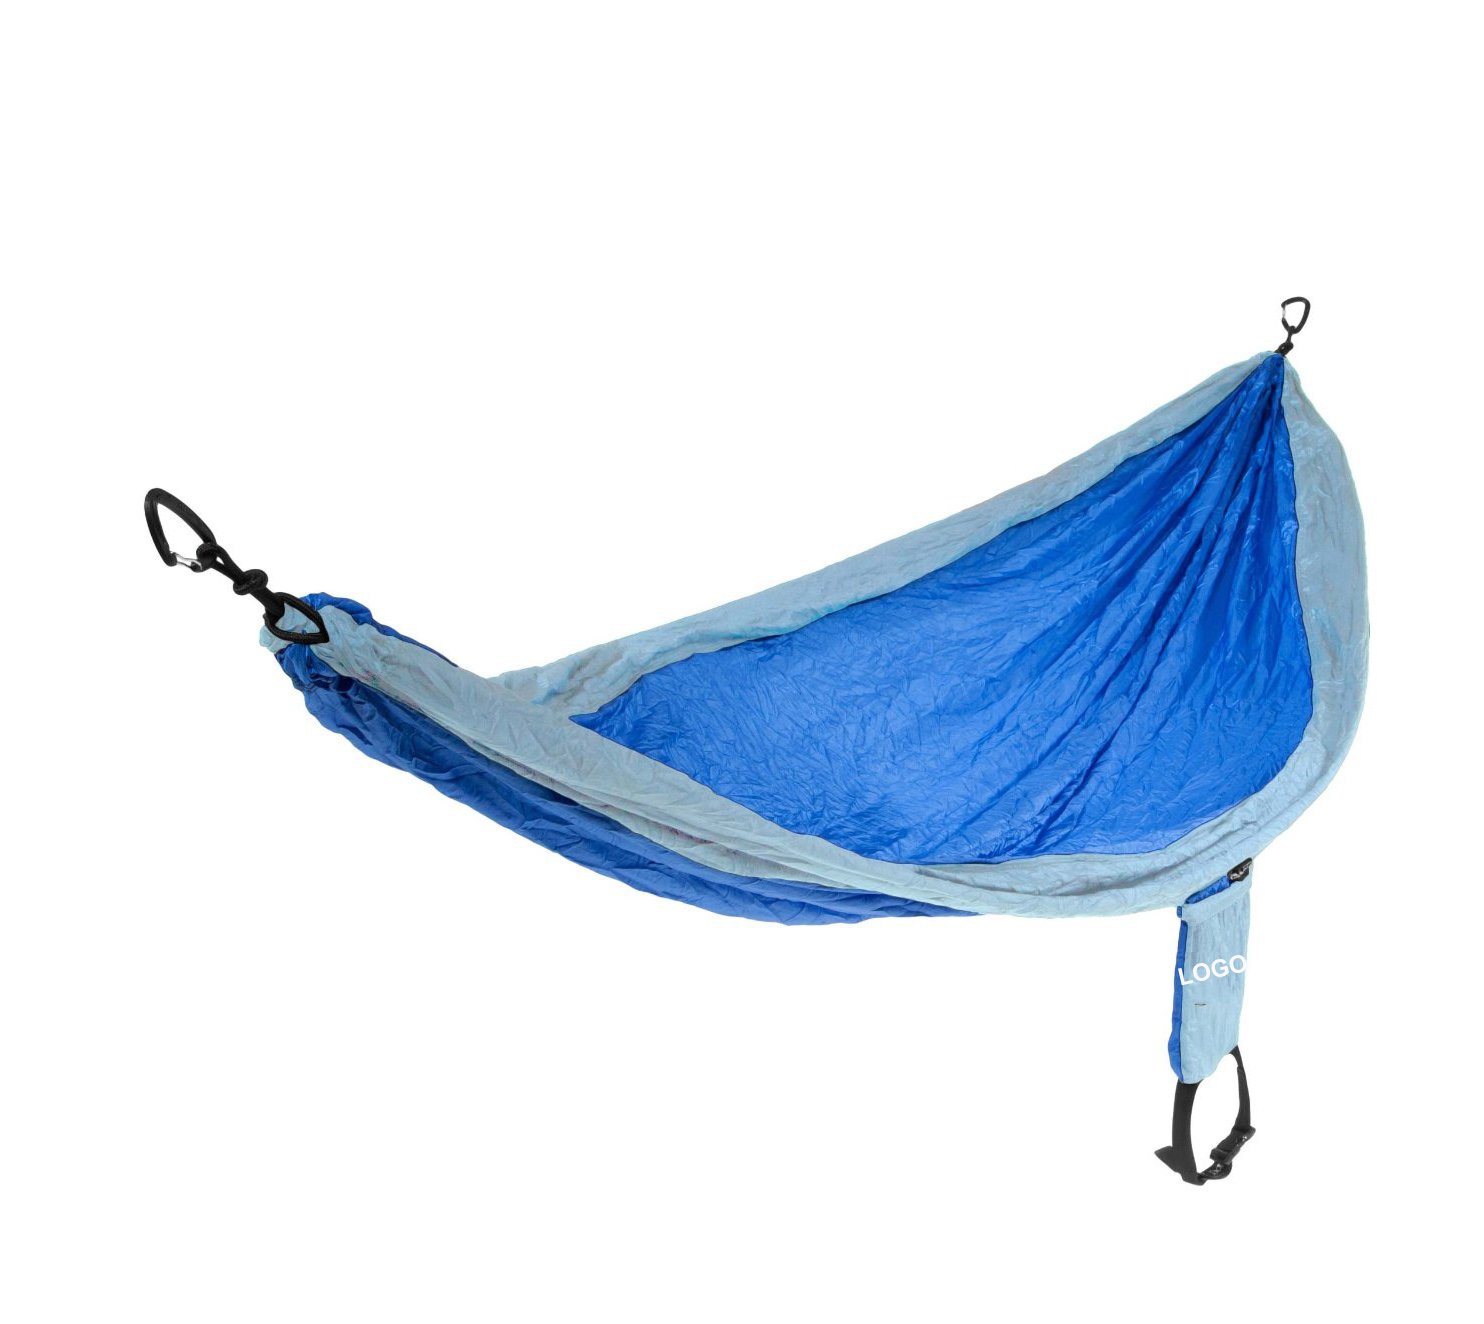  USA Camp Hiking Hammock with Free Tree Strap and Carabiners